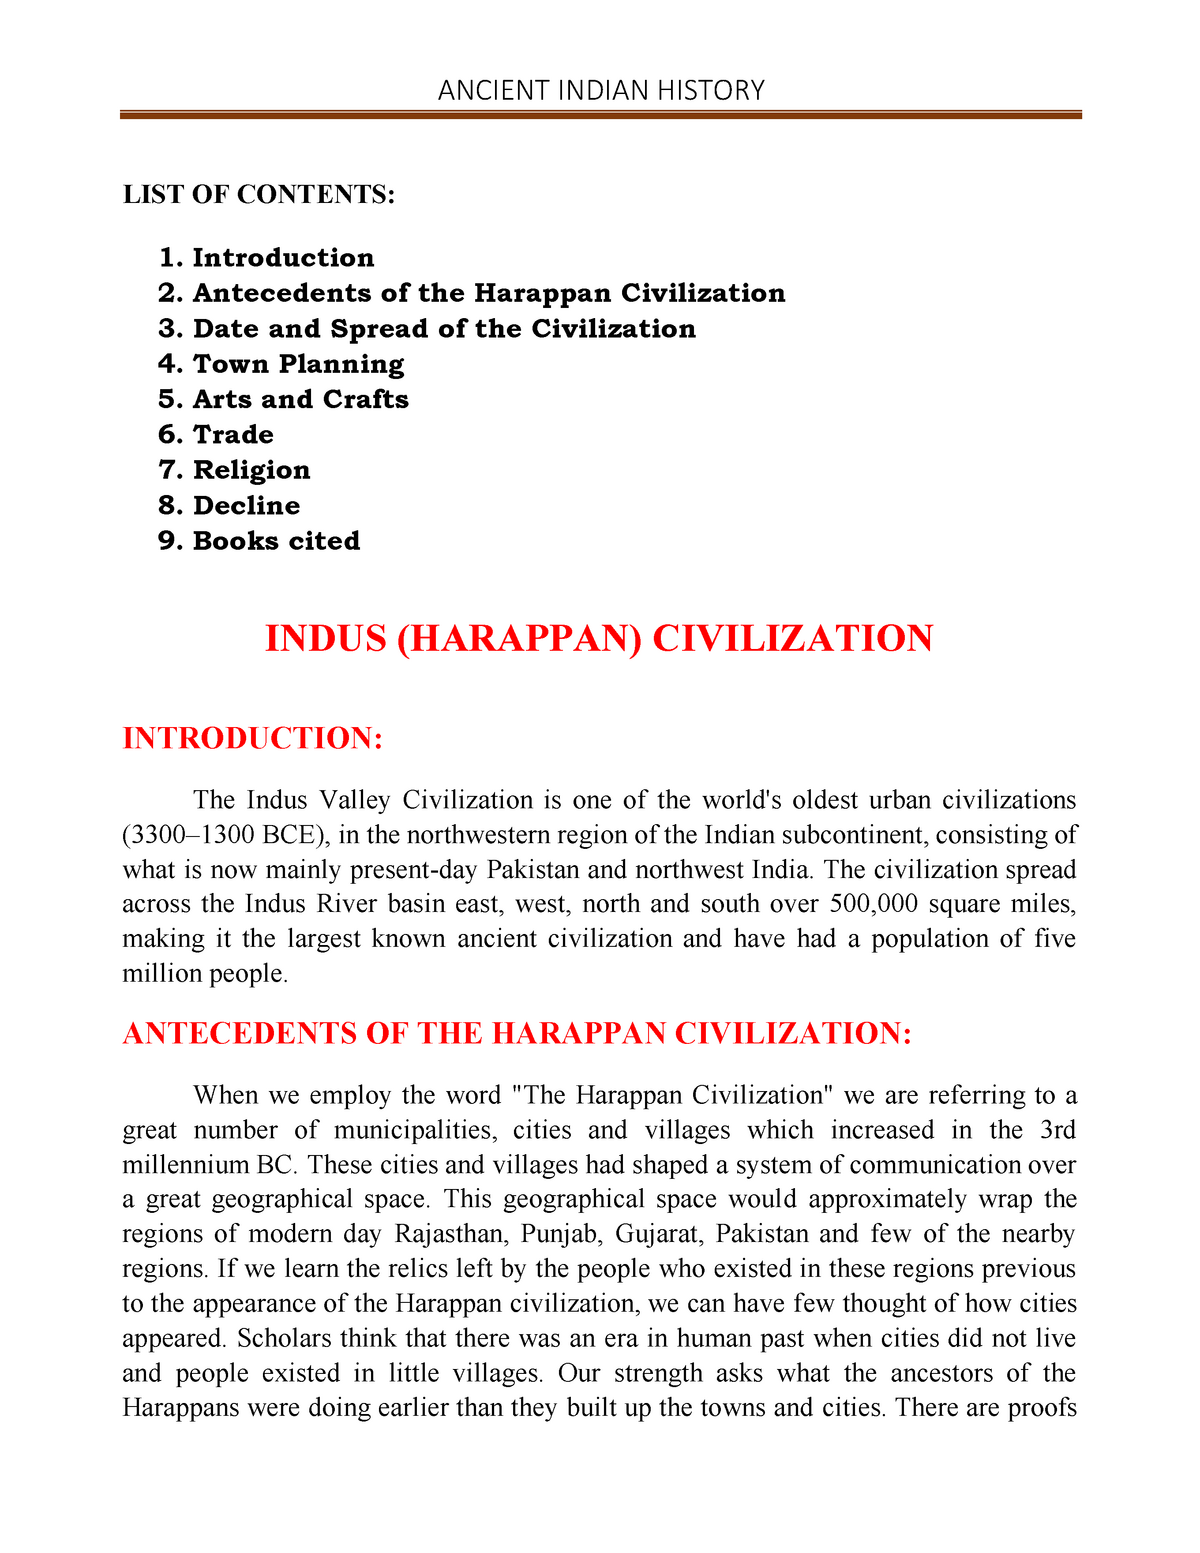 Harappan Civilization LIST OF CONTENTS 1. Introduction 2